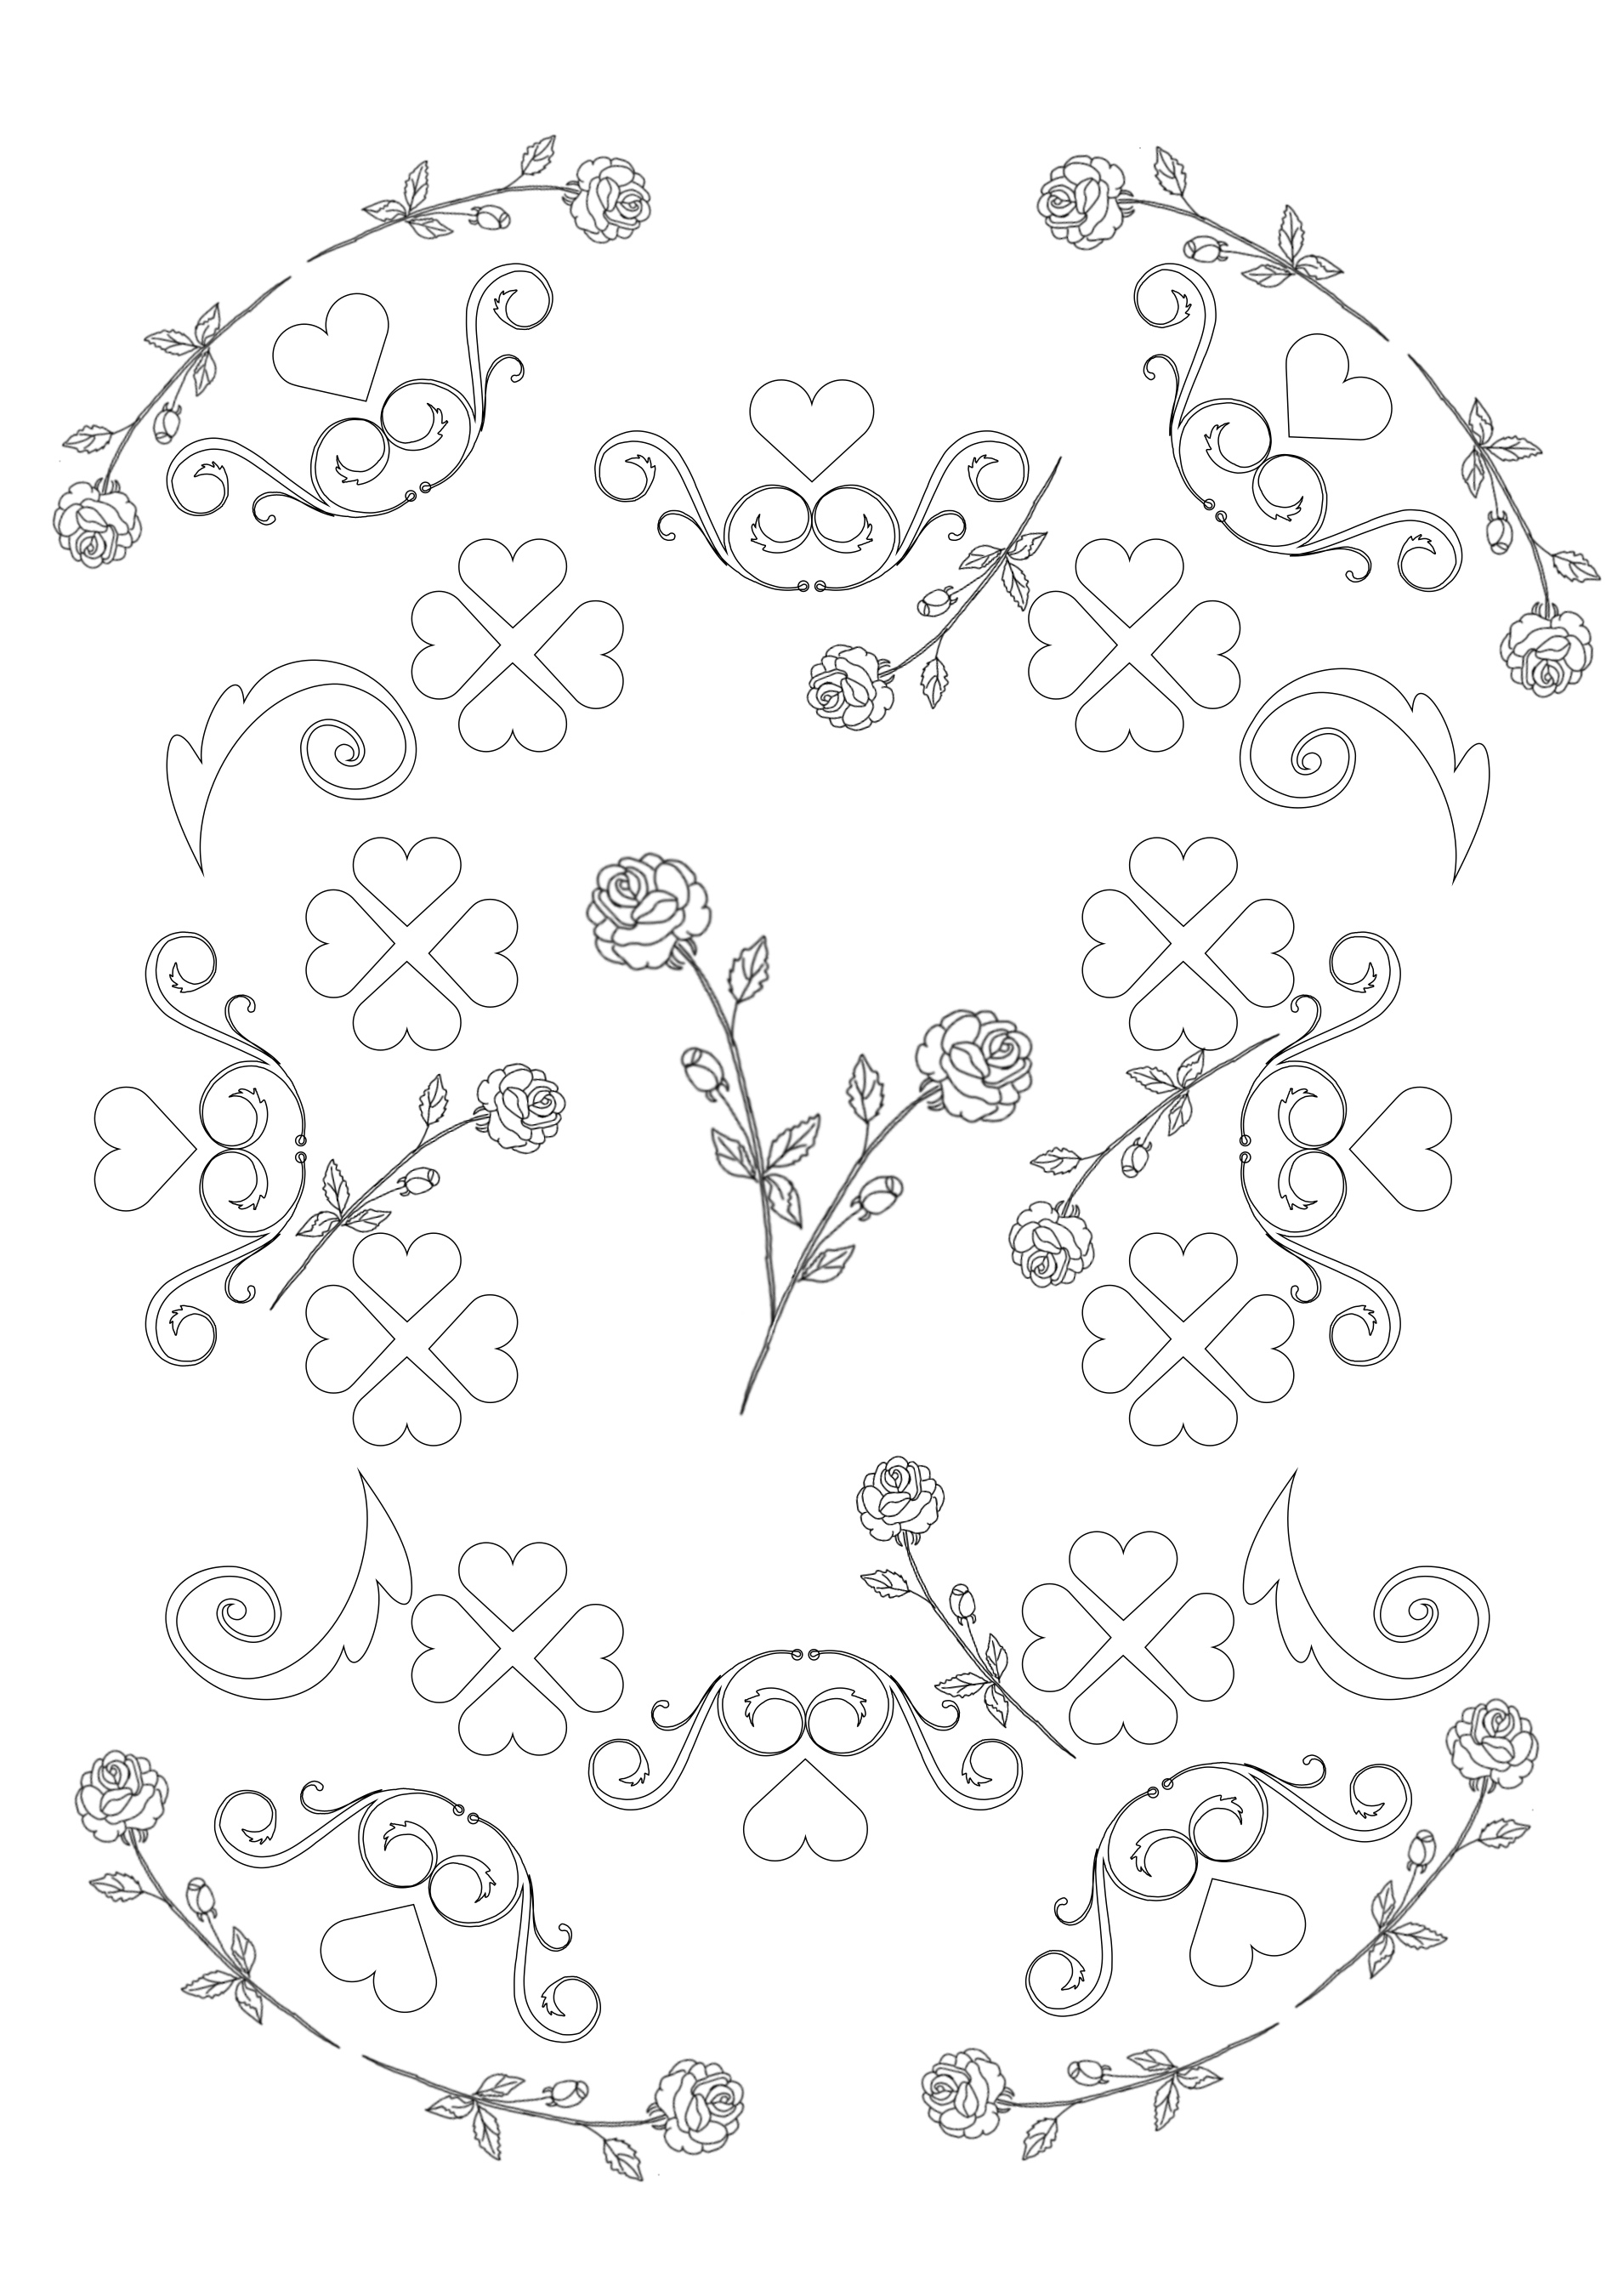 Roses and hearts Valentine coloring page